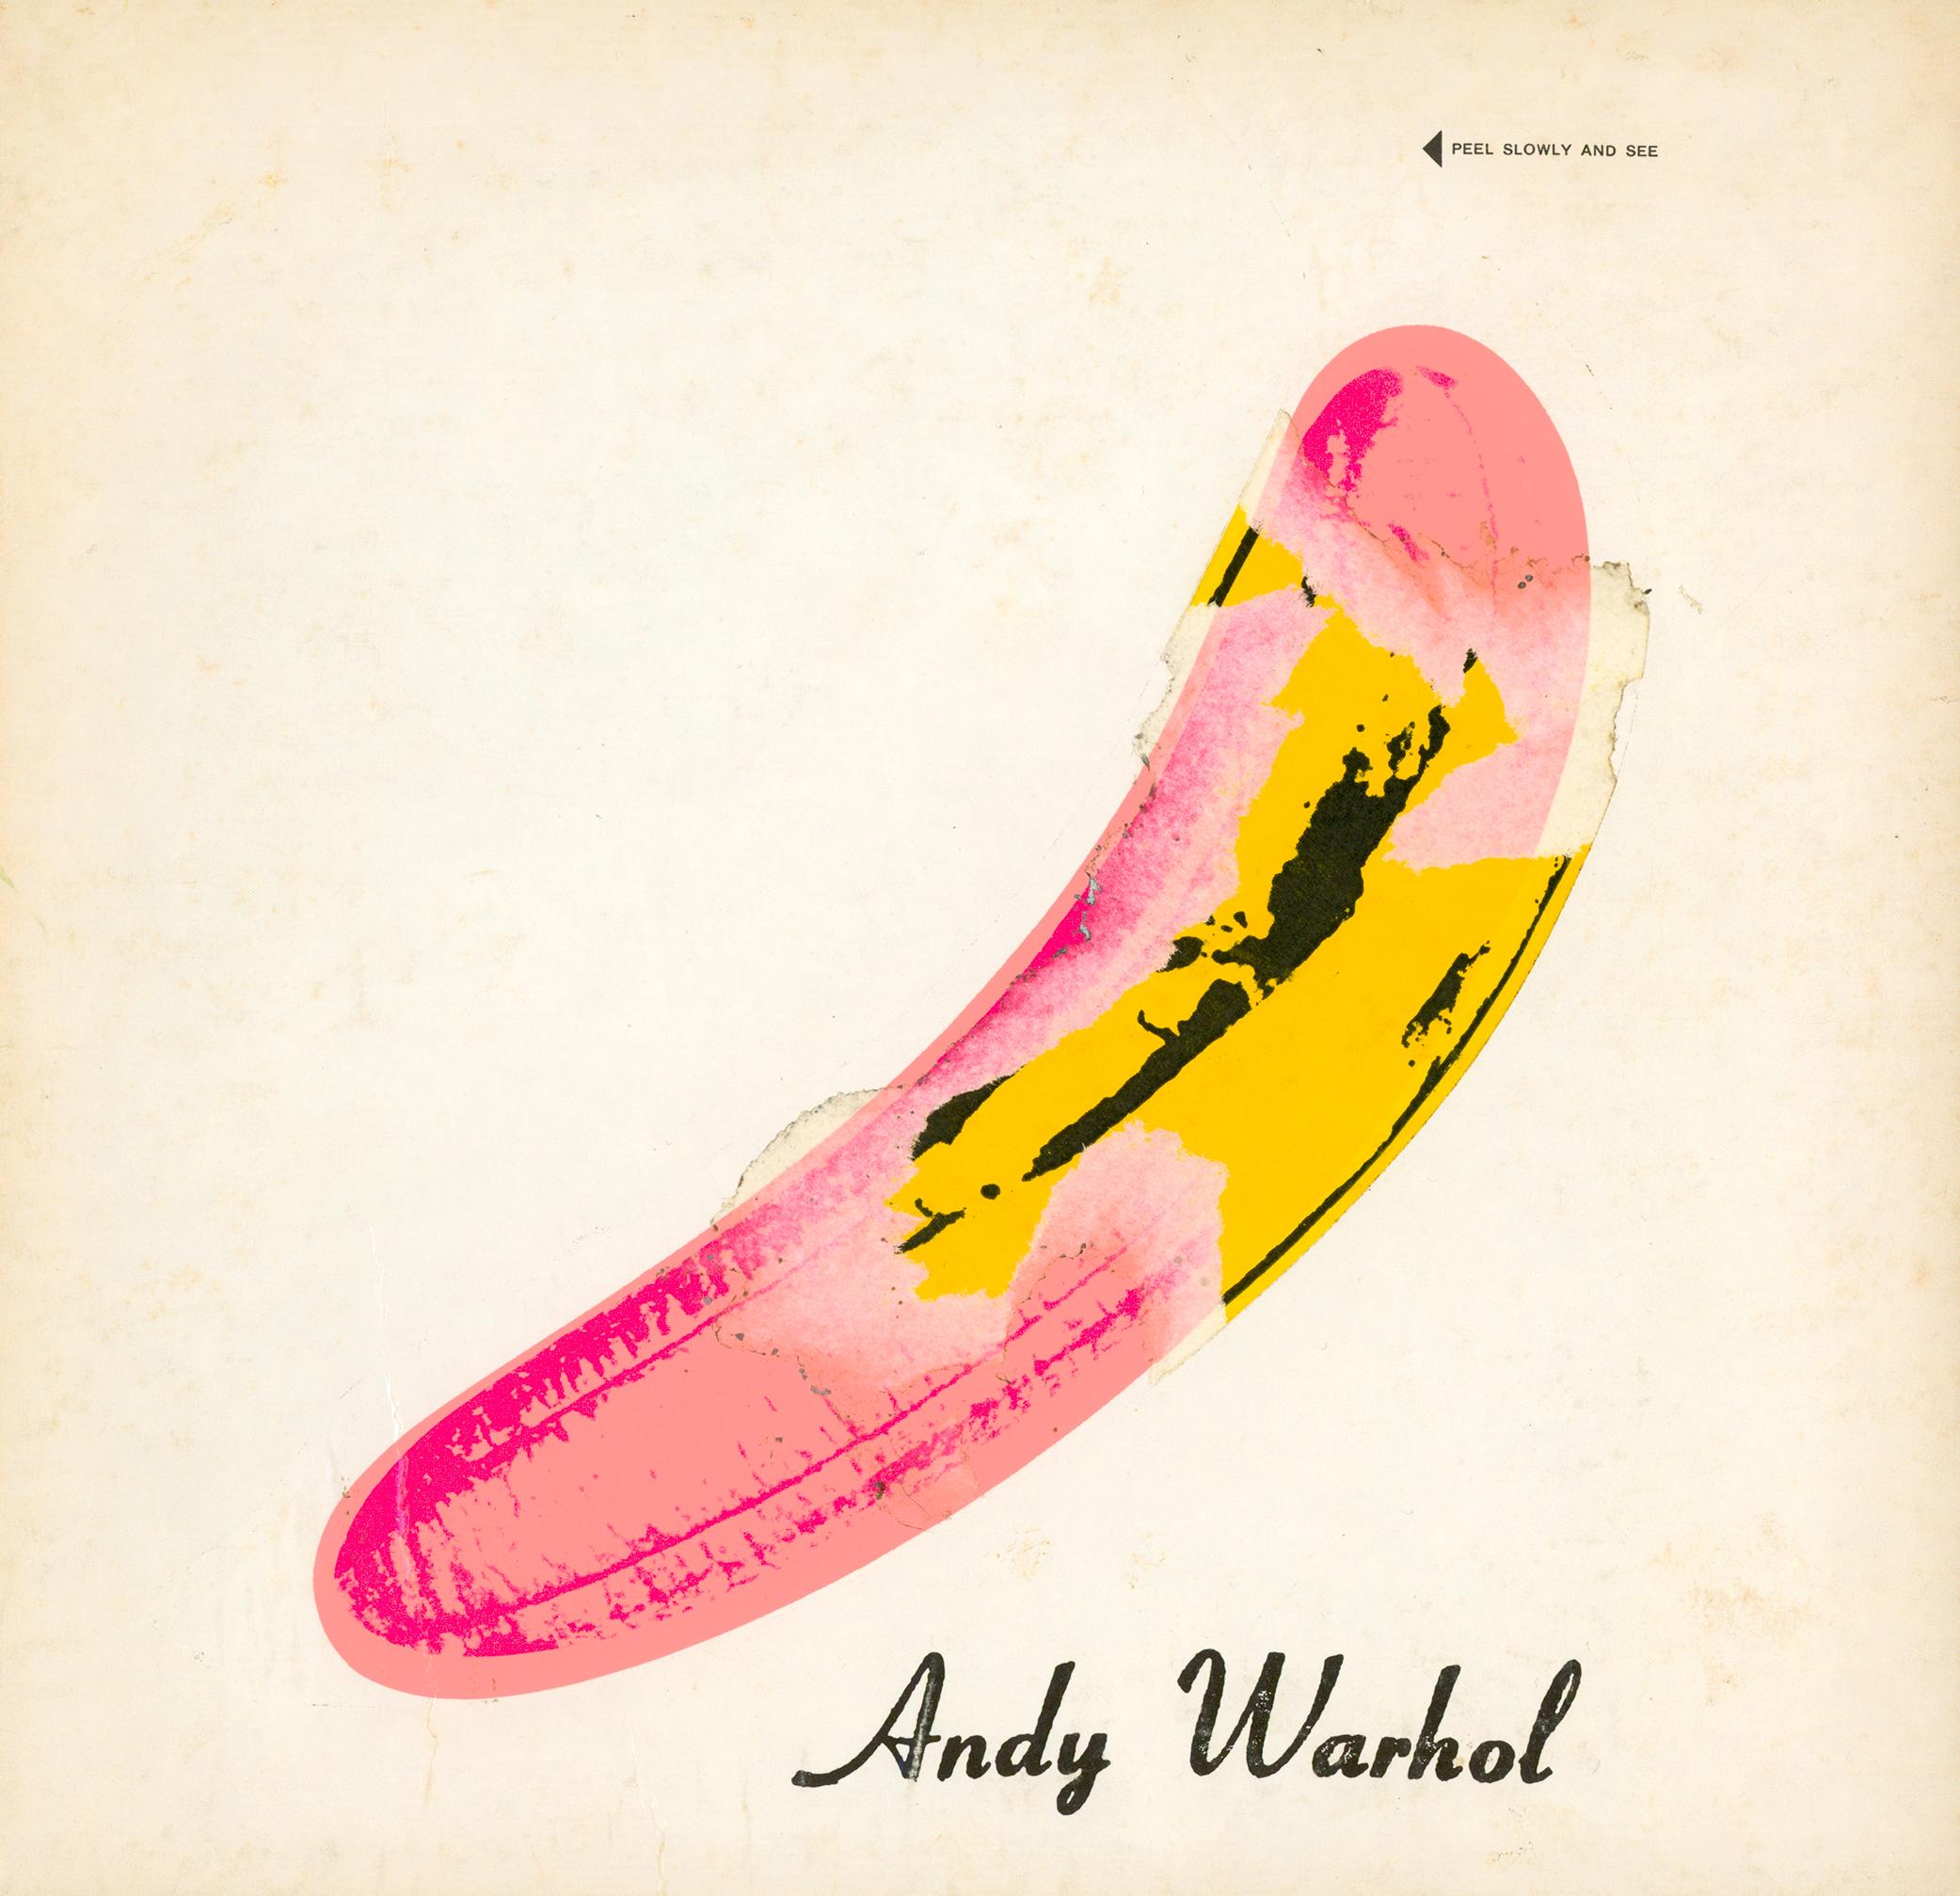 Andy Warhol Banana Cover Art 1967:
The Velvet Underground & Nico: a set of 4 individual, visually striking original 1967 pressing’s accompanied by their original covers and records. Each Warhol Banana cover is presented in varying ‘peeled’ states to